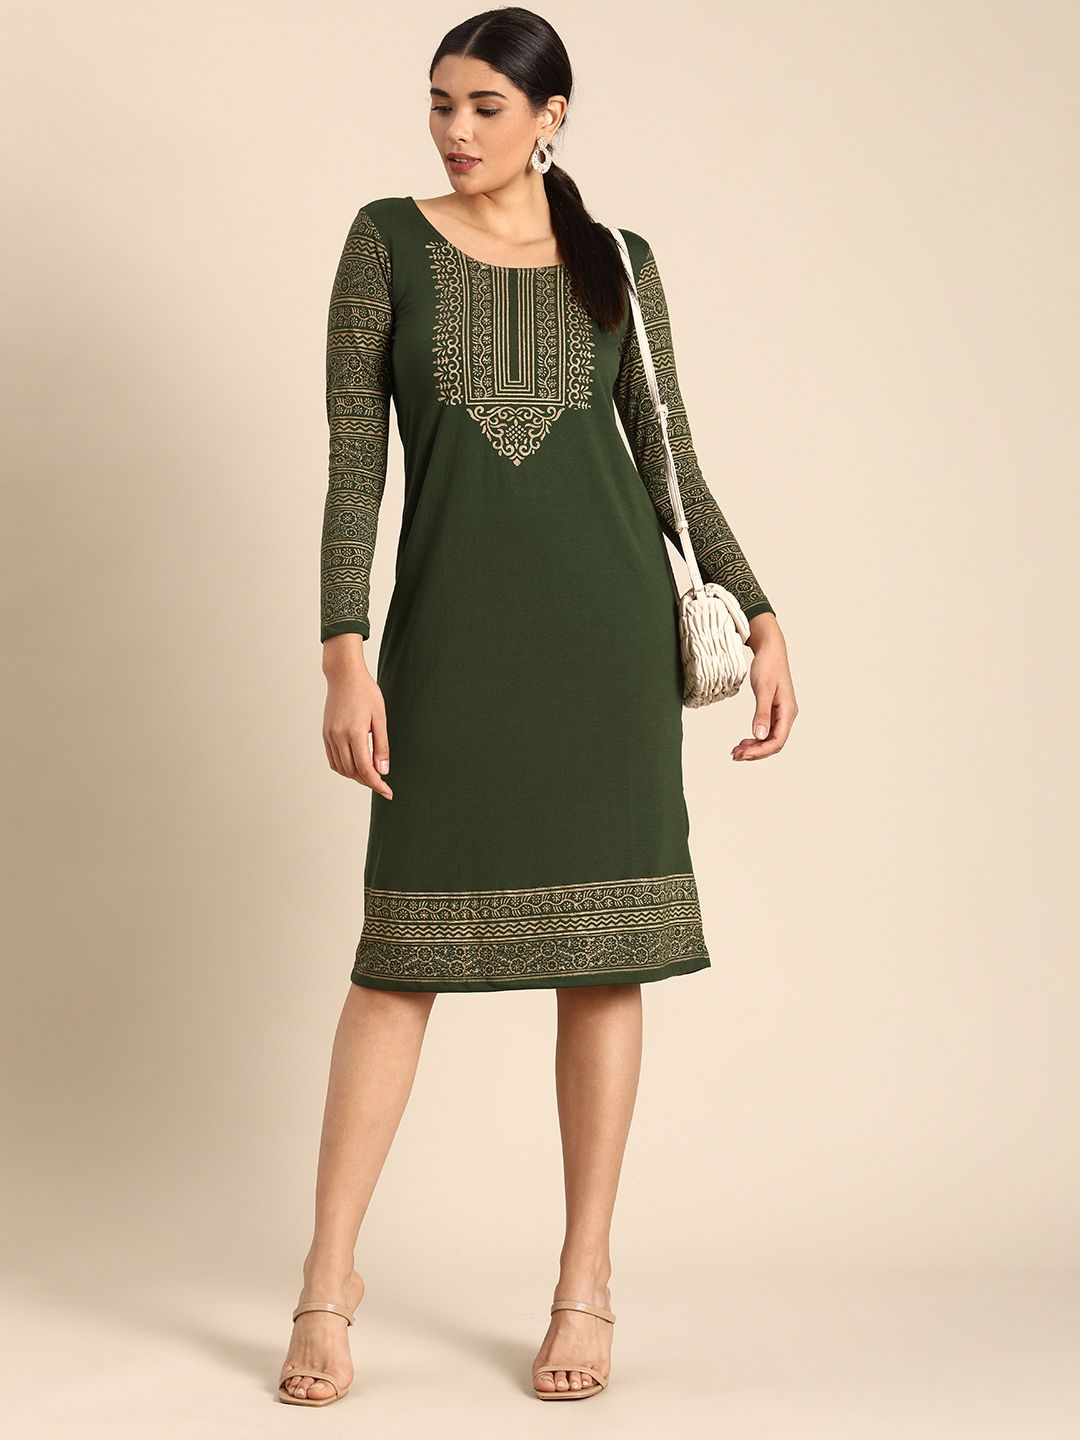 Anouk Olive Green & Gold-Toned Ethnic Motifs Foil Printed Sheath Dress Price in India